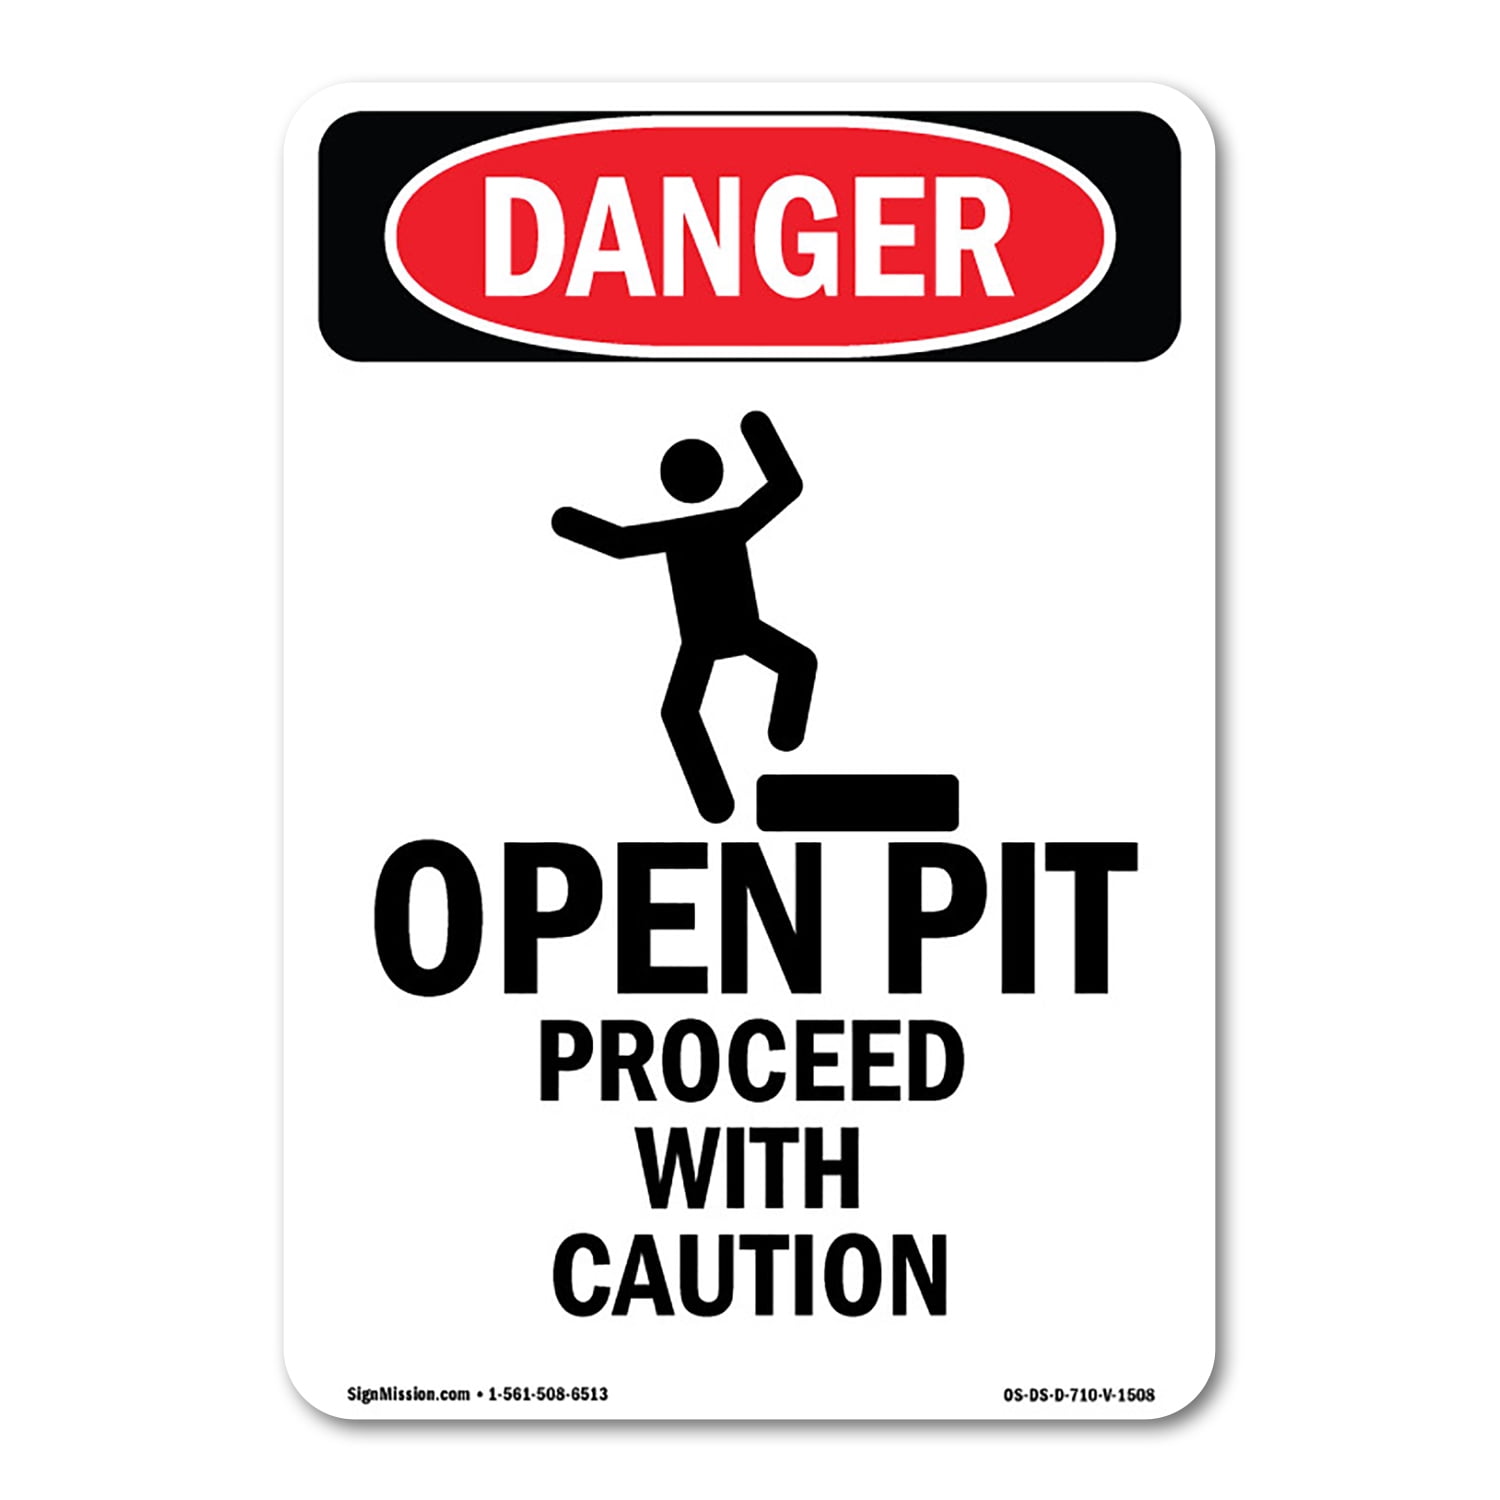 Osha Danger Sign Open Pit Proceed With Caution Decal Protect Your Business Construction 